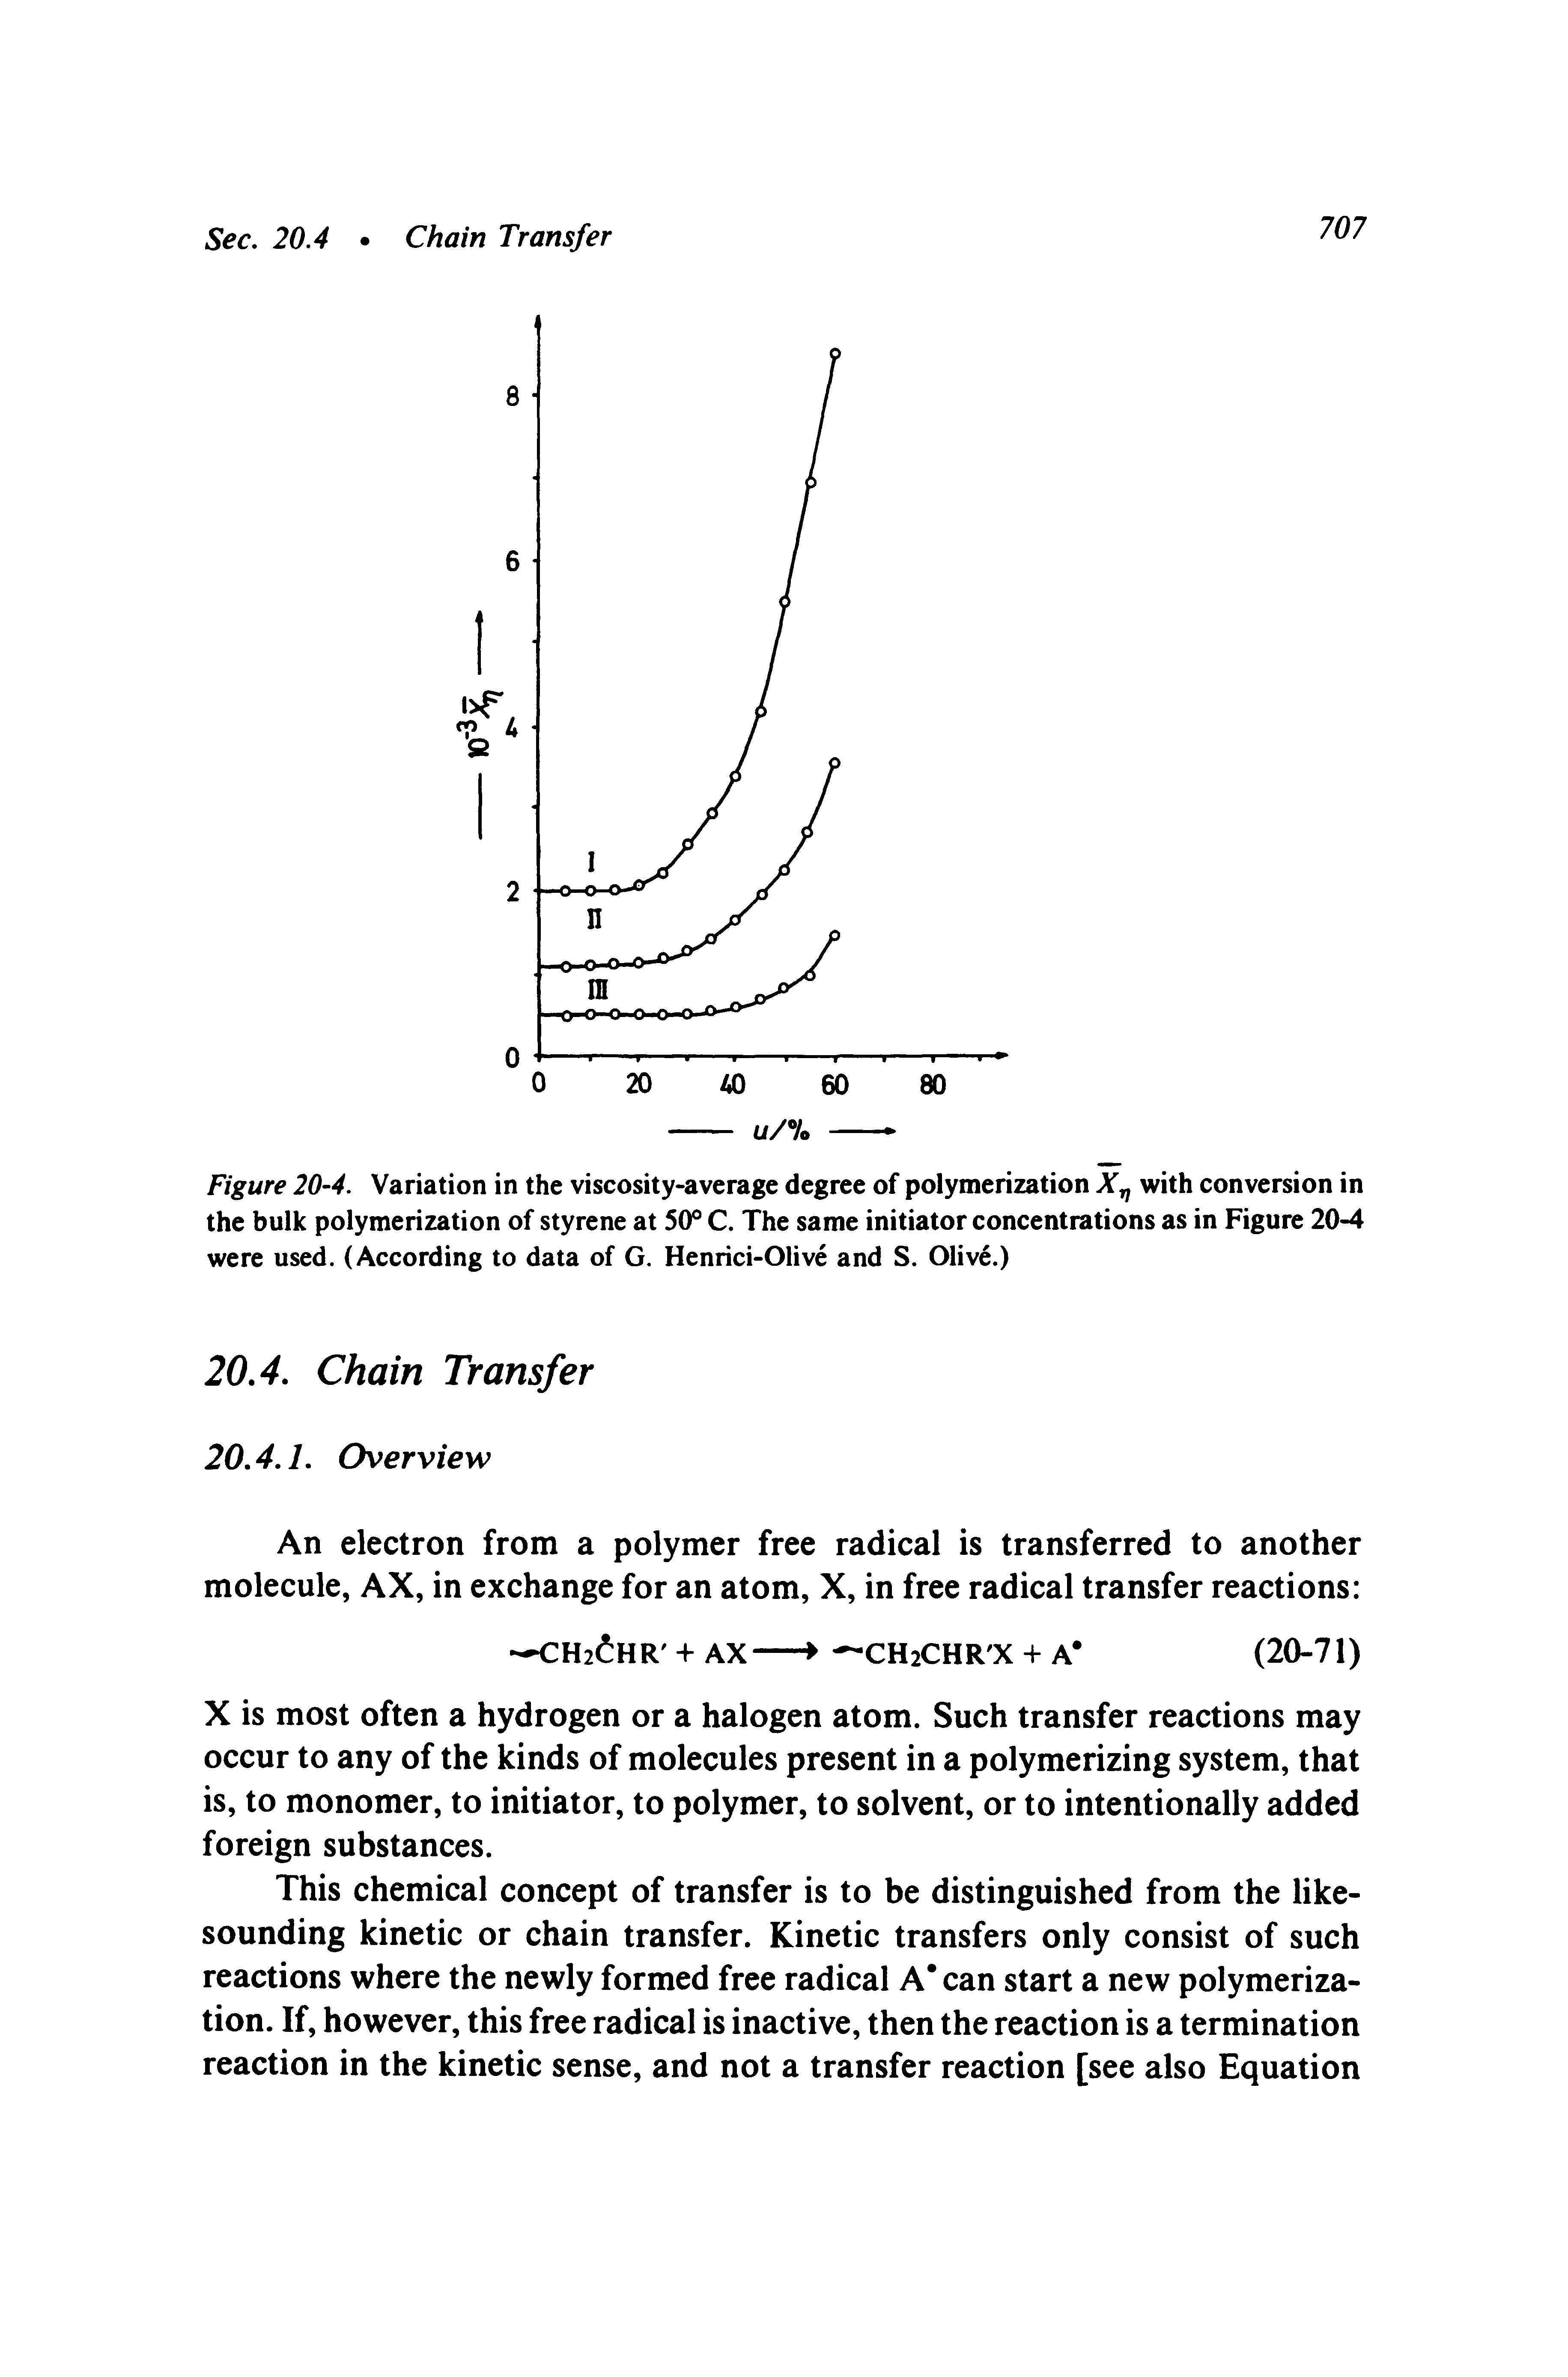 Figure 20-4. Variation in the viscosity-average degree of polymerization with conversion in the bulk polymerization of styrene at 50 C. The same initiator concentrations as in Figure 20-4 were used. (According to data of G. Henrici-Olive and S. Olive.)...